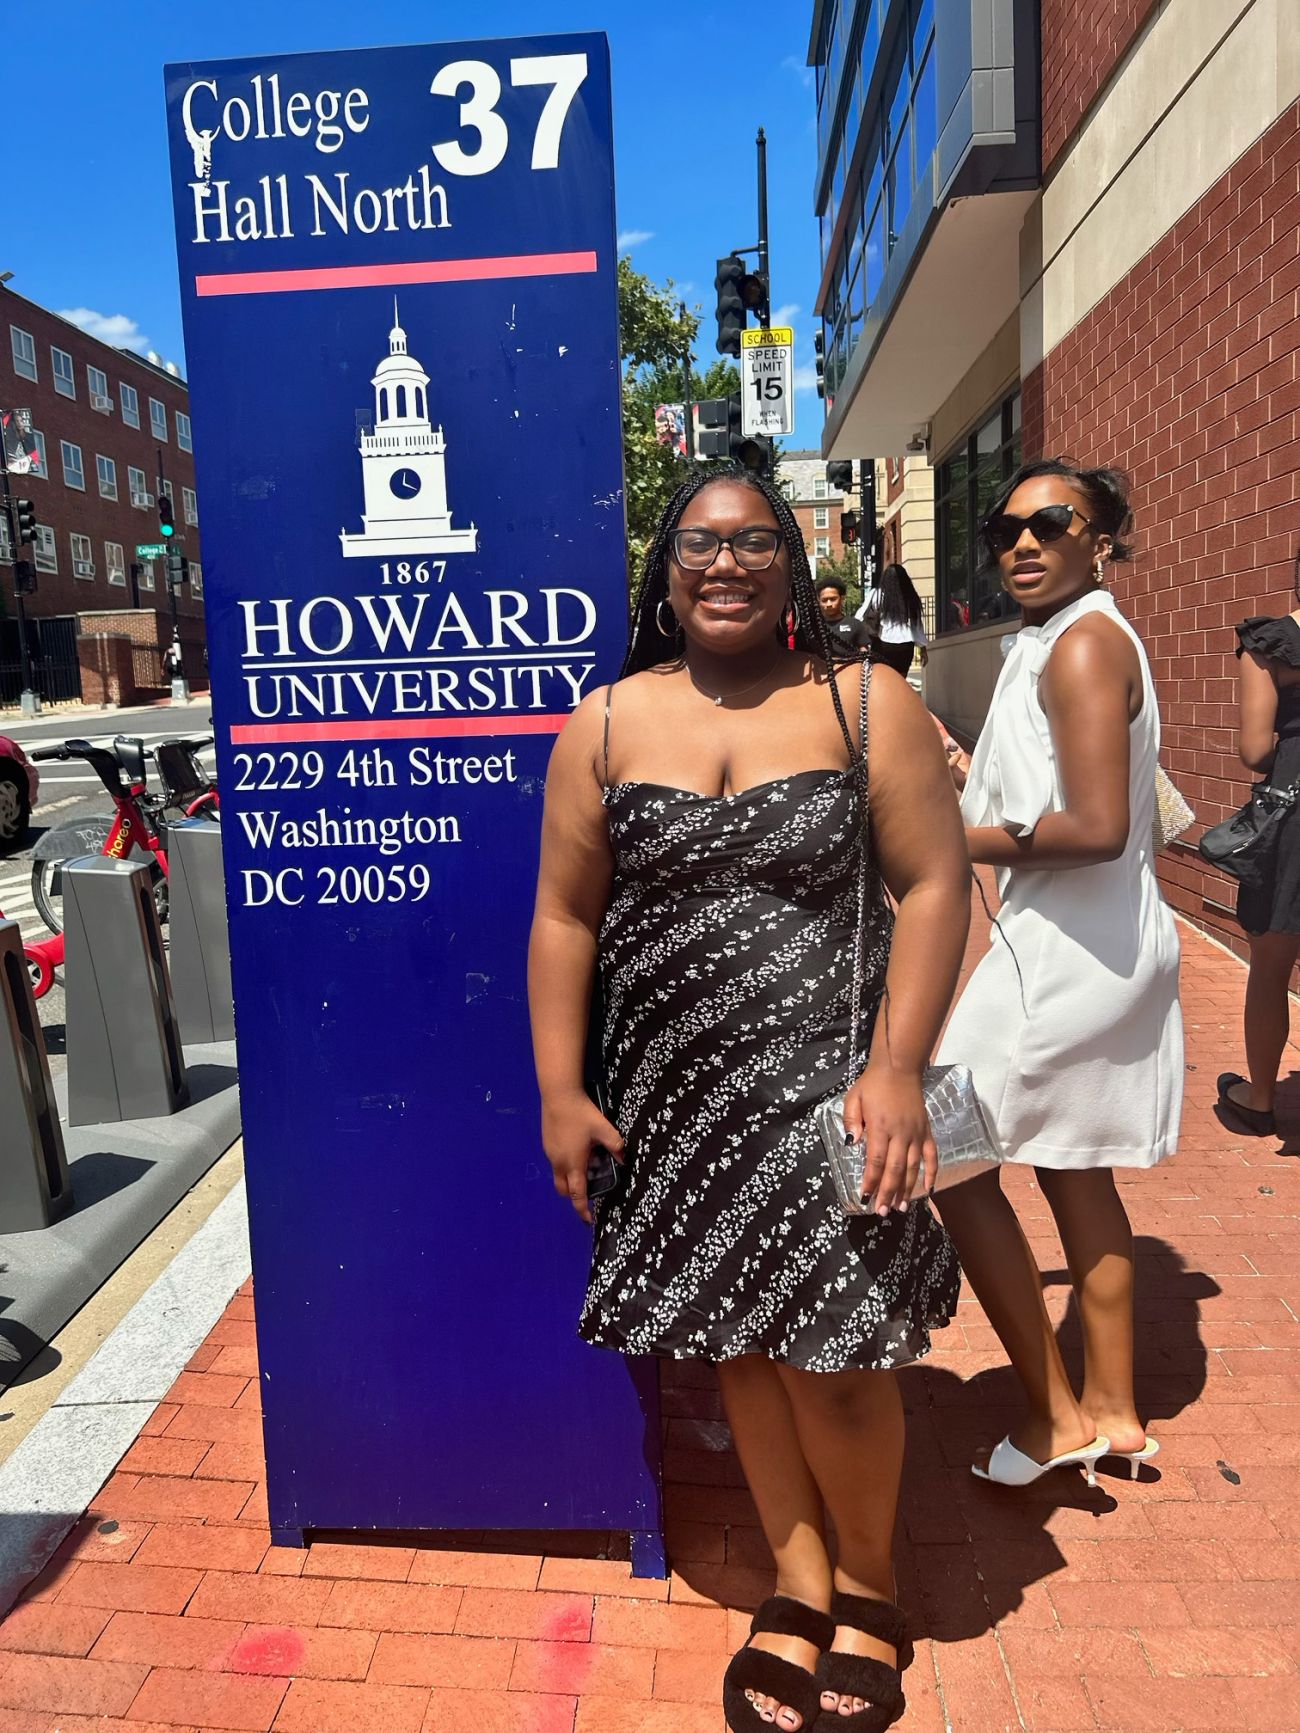 Young woman posing in front of a blue sign for Howard University in Washington, D.C.